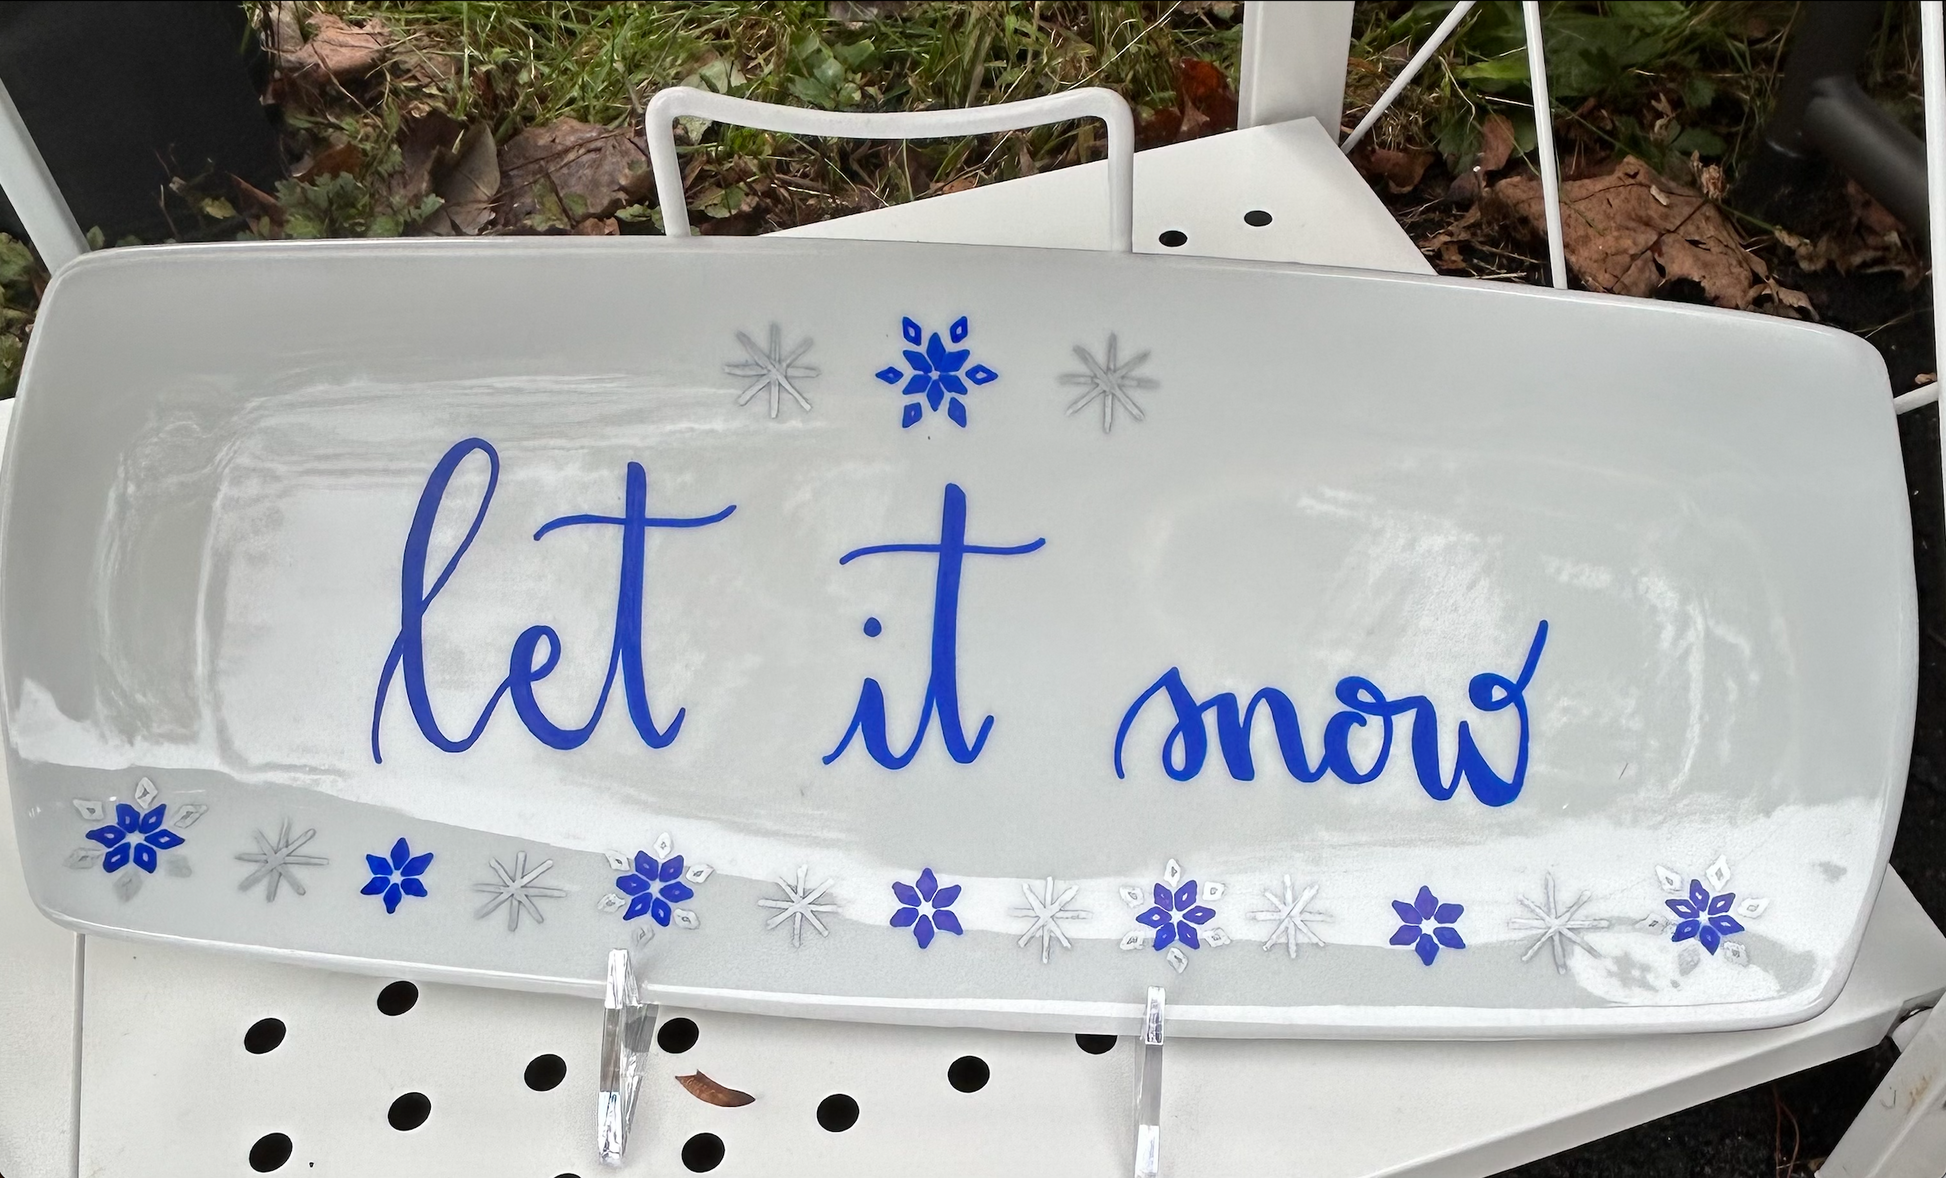 Hand-painted winter themed serving platter with snowflakes and "let it snow" written in calligraphy